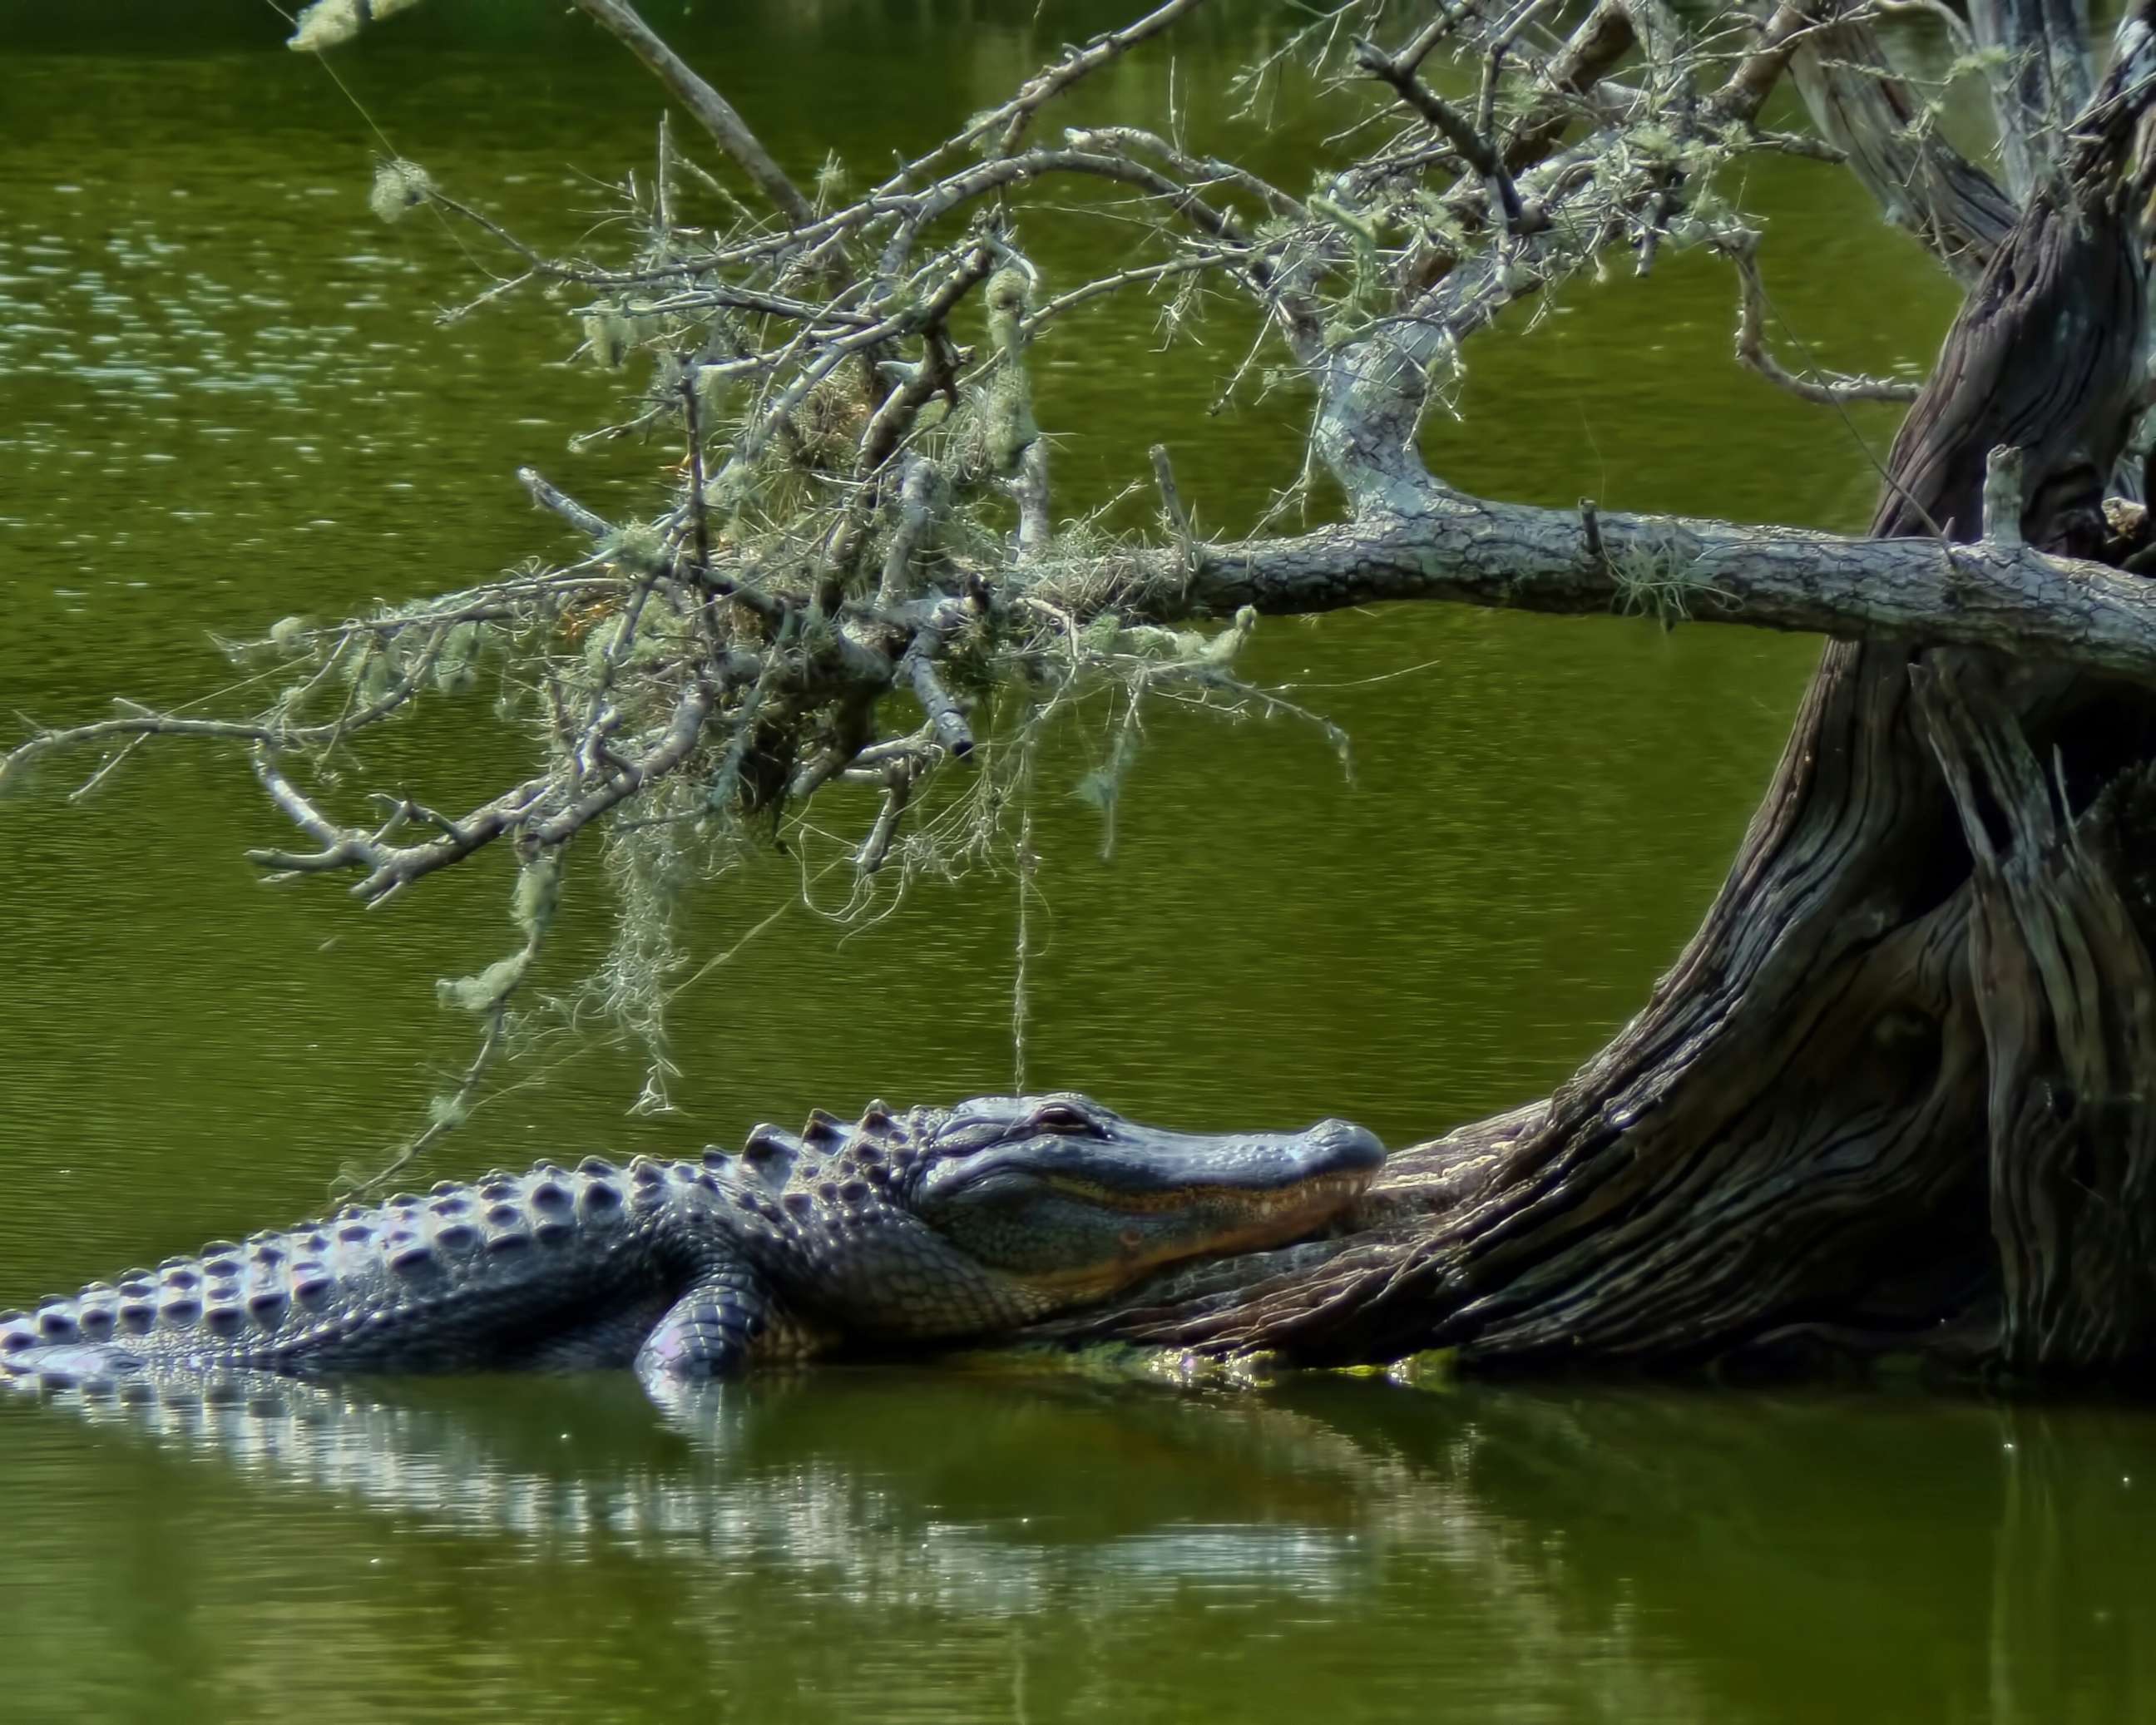 PHOTO: An alligator is seen near the base of a tree in this undated stock photo.